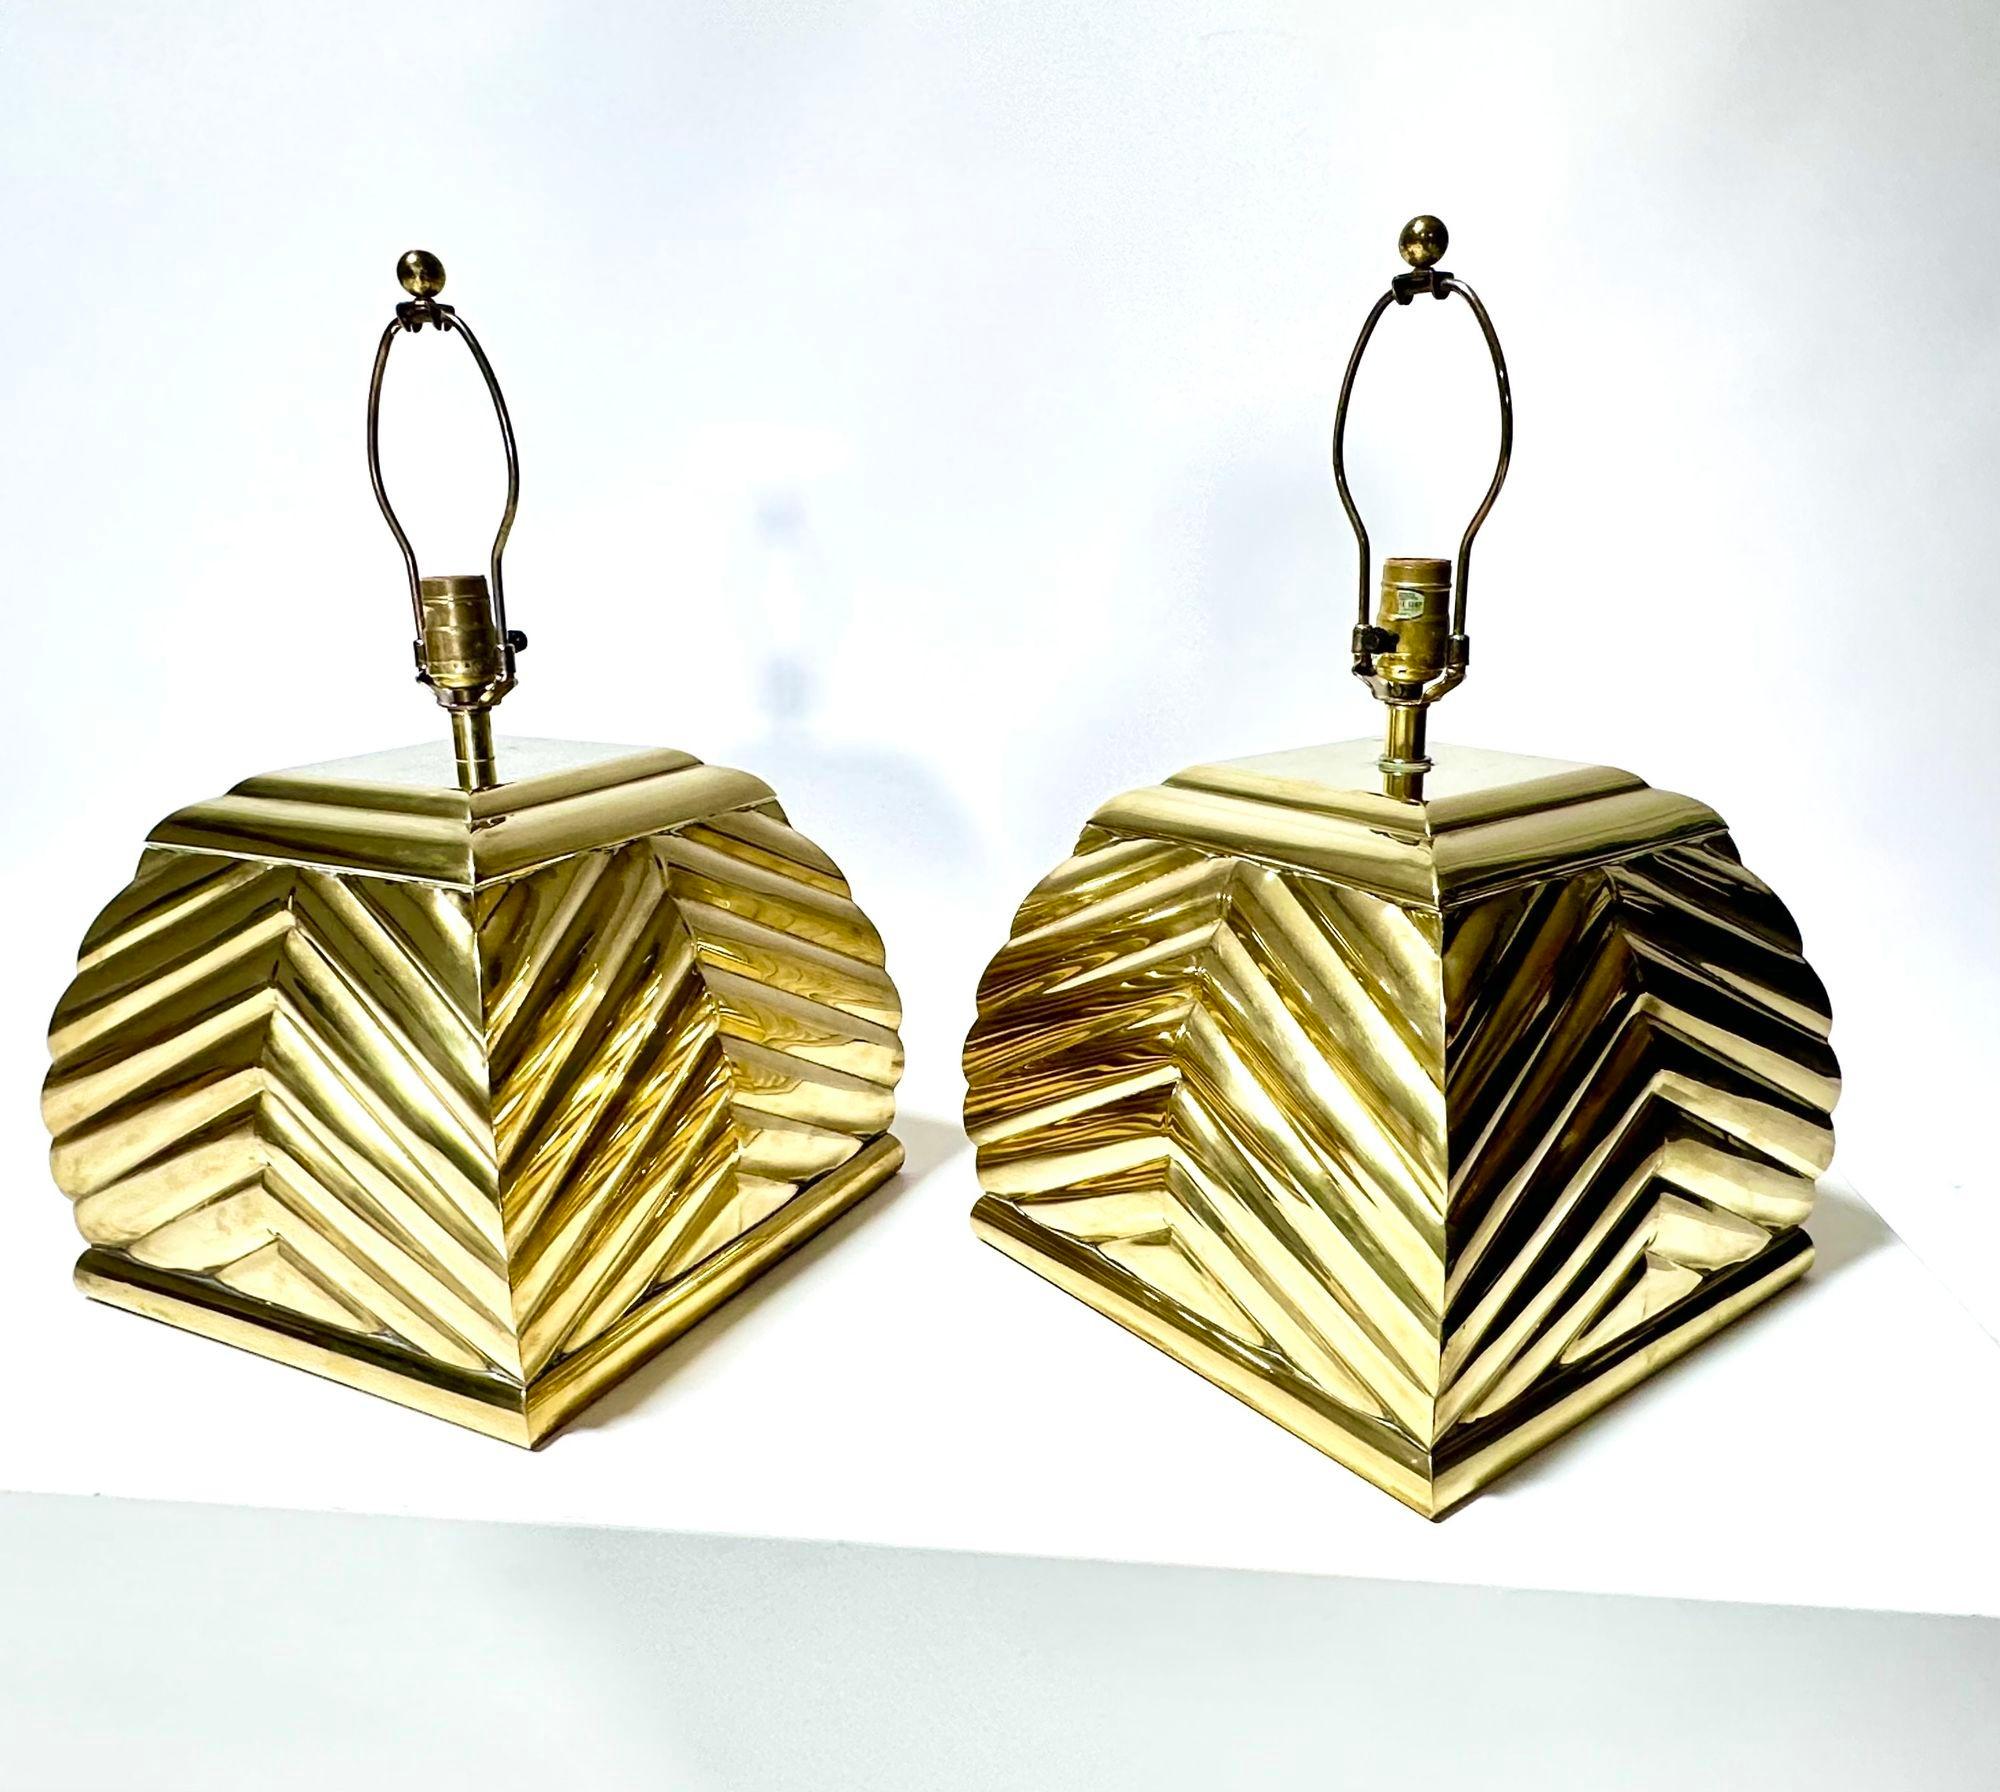 Chapman Pair Brass Sculptural Table Lamps, 1960 In Good Condition For Sale In Chicago, IL